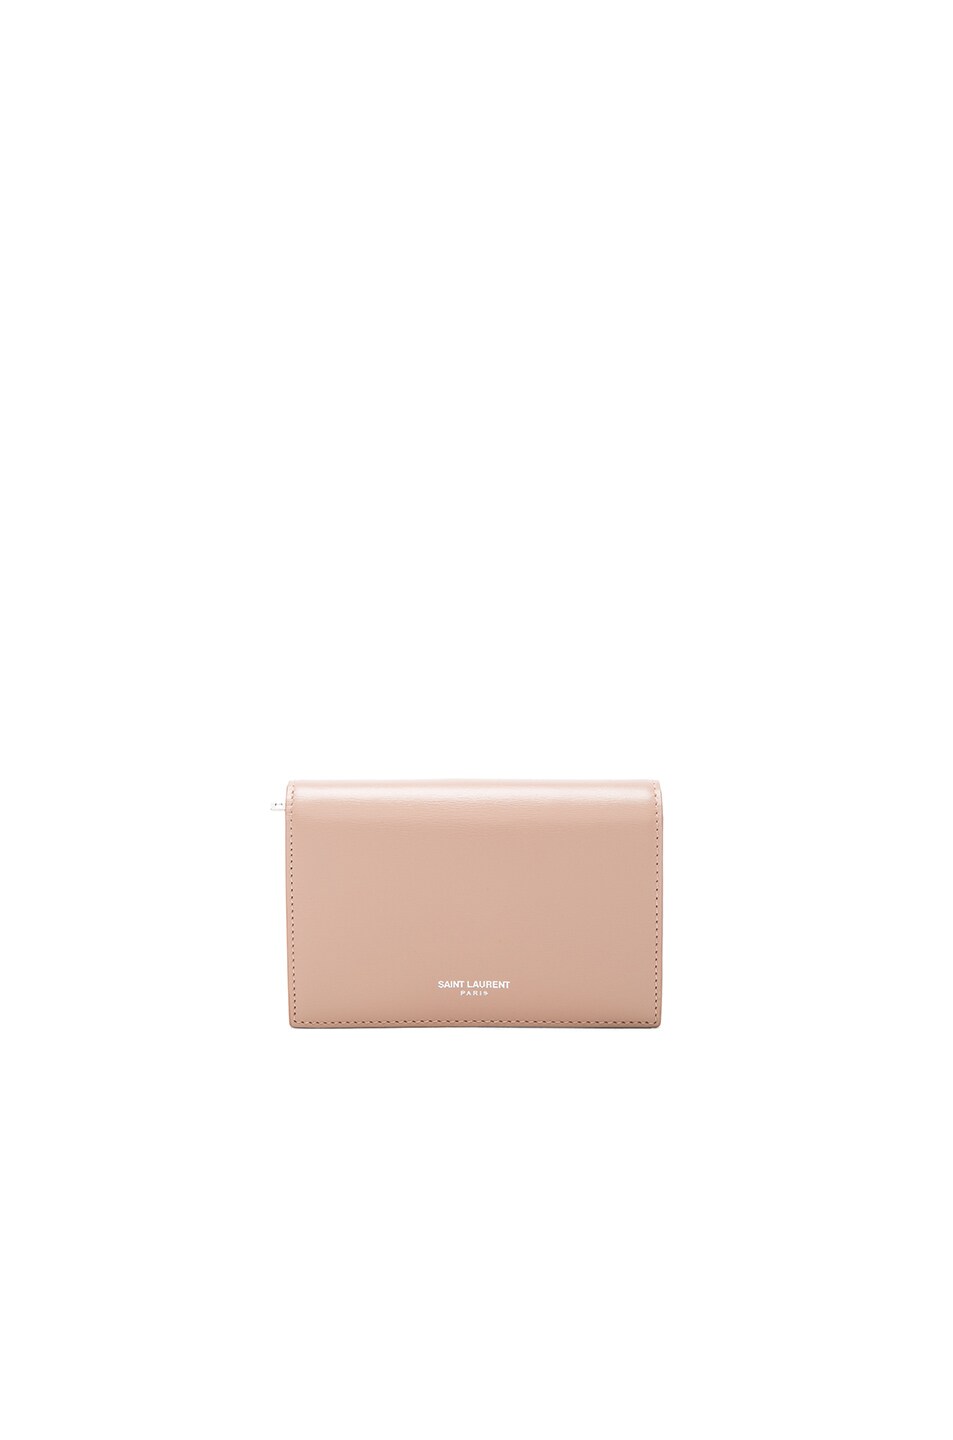 Image 1 of Saint Laurent Large Fragments Flap Wallet in Nude Pink